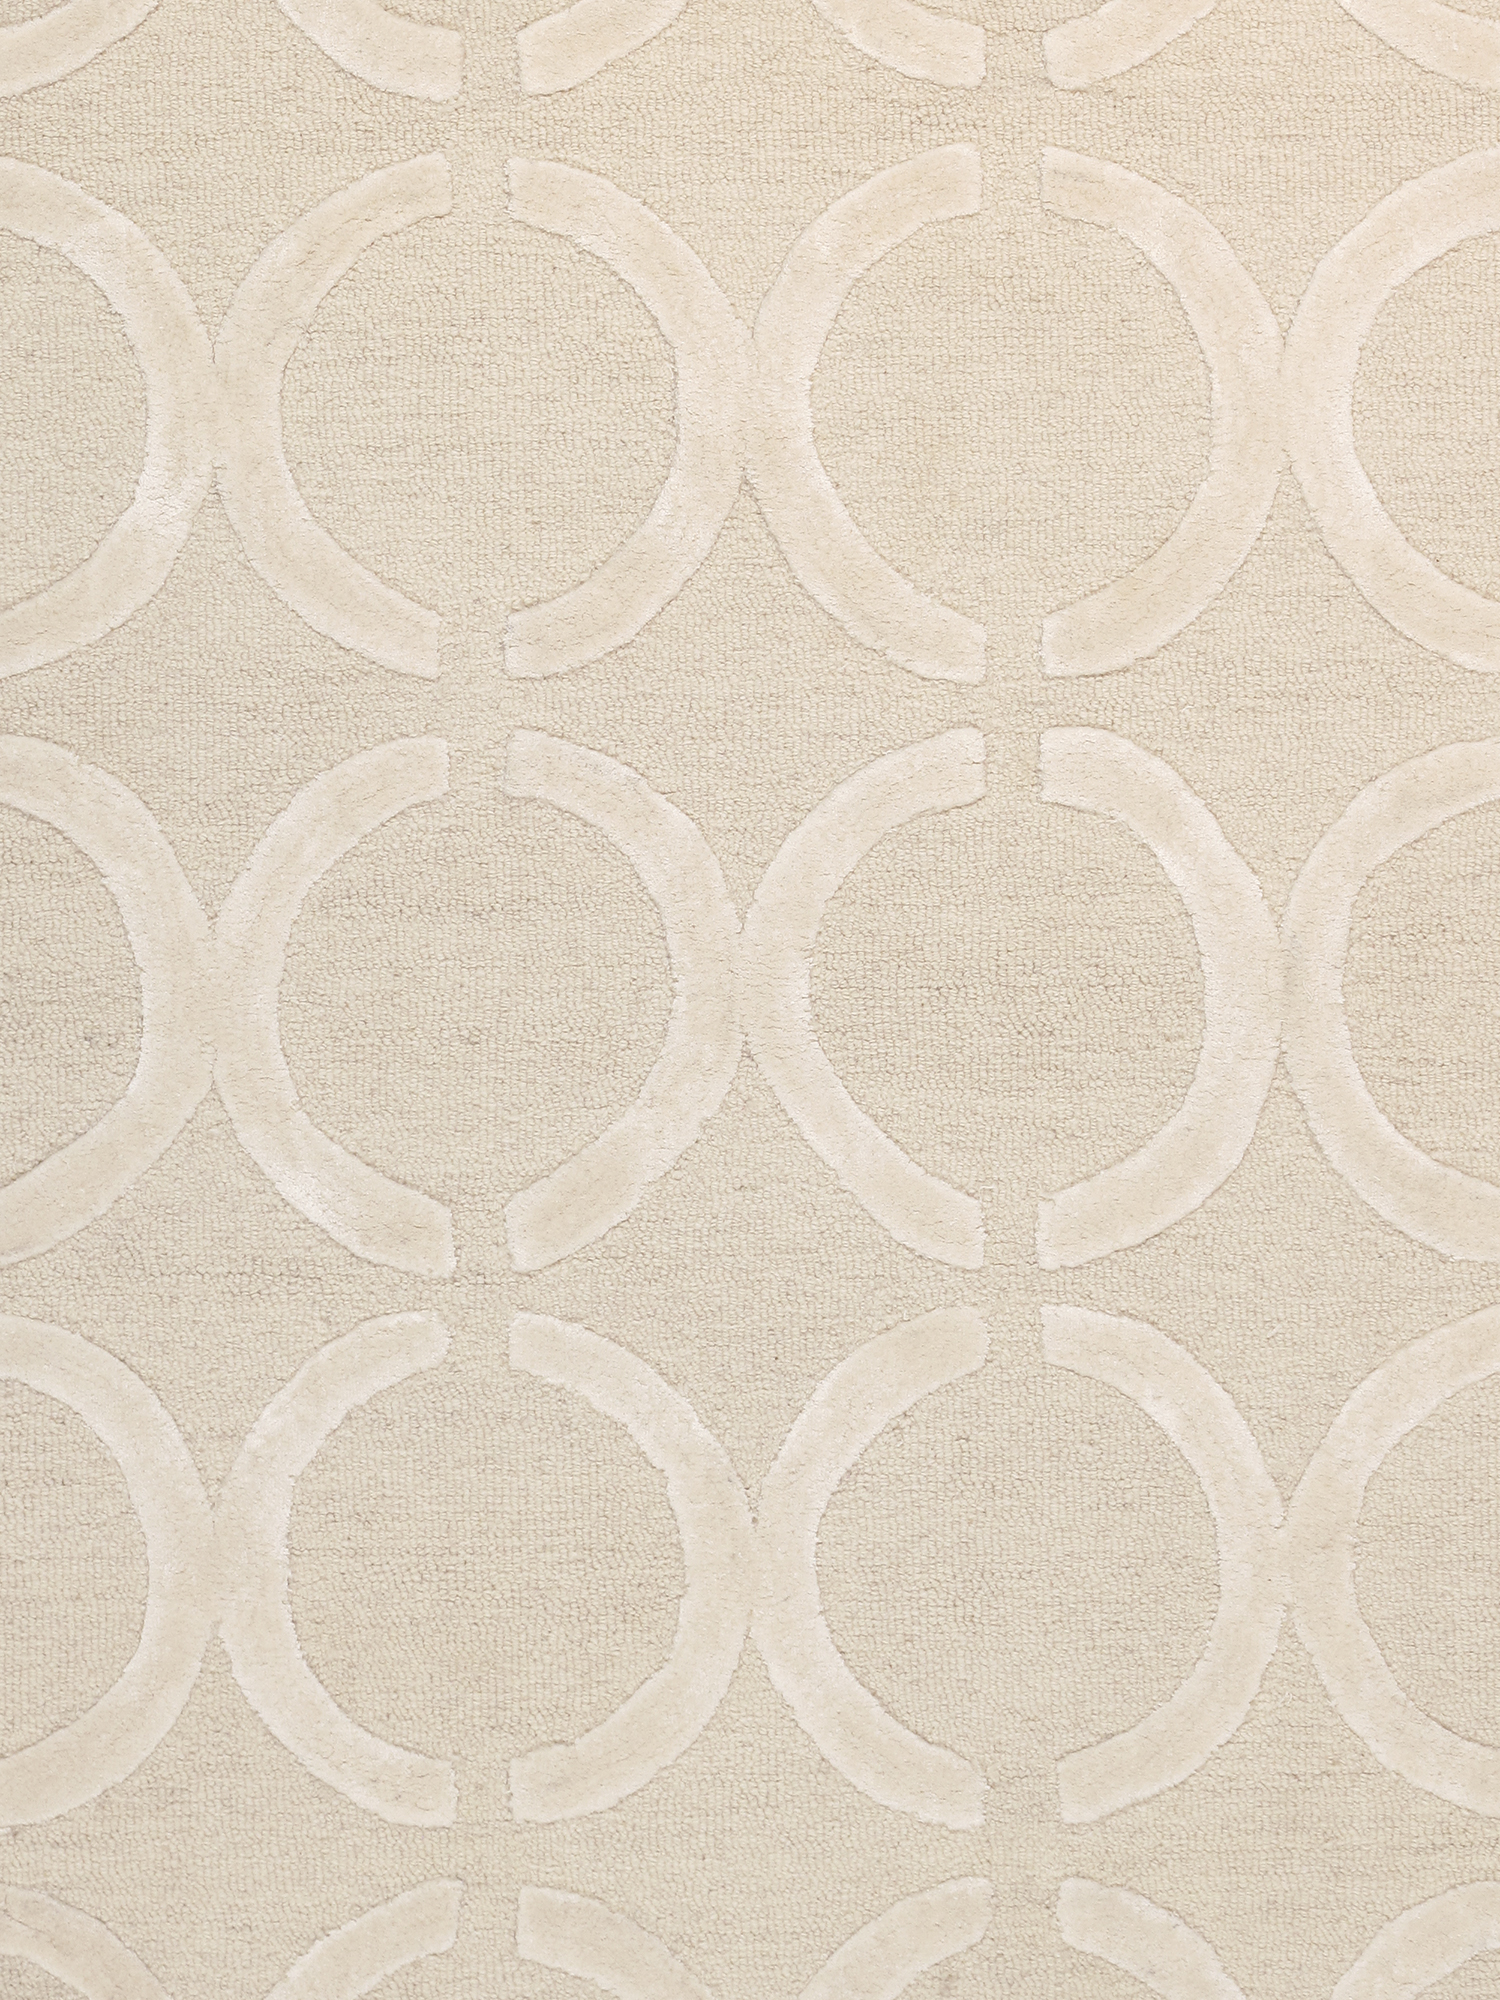 Pasargad Home Edgy Collection Hand-Tufted Silk & Wool Area Rug- 8' 6" X 11' 6" - image 2 of 5